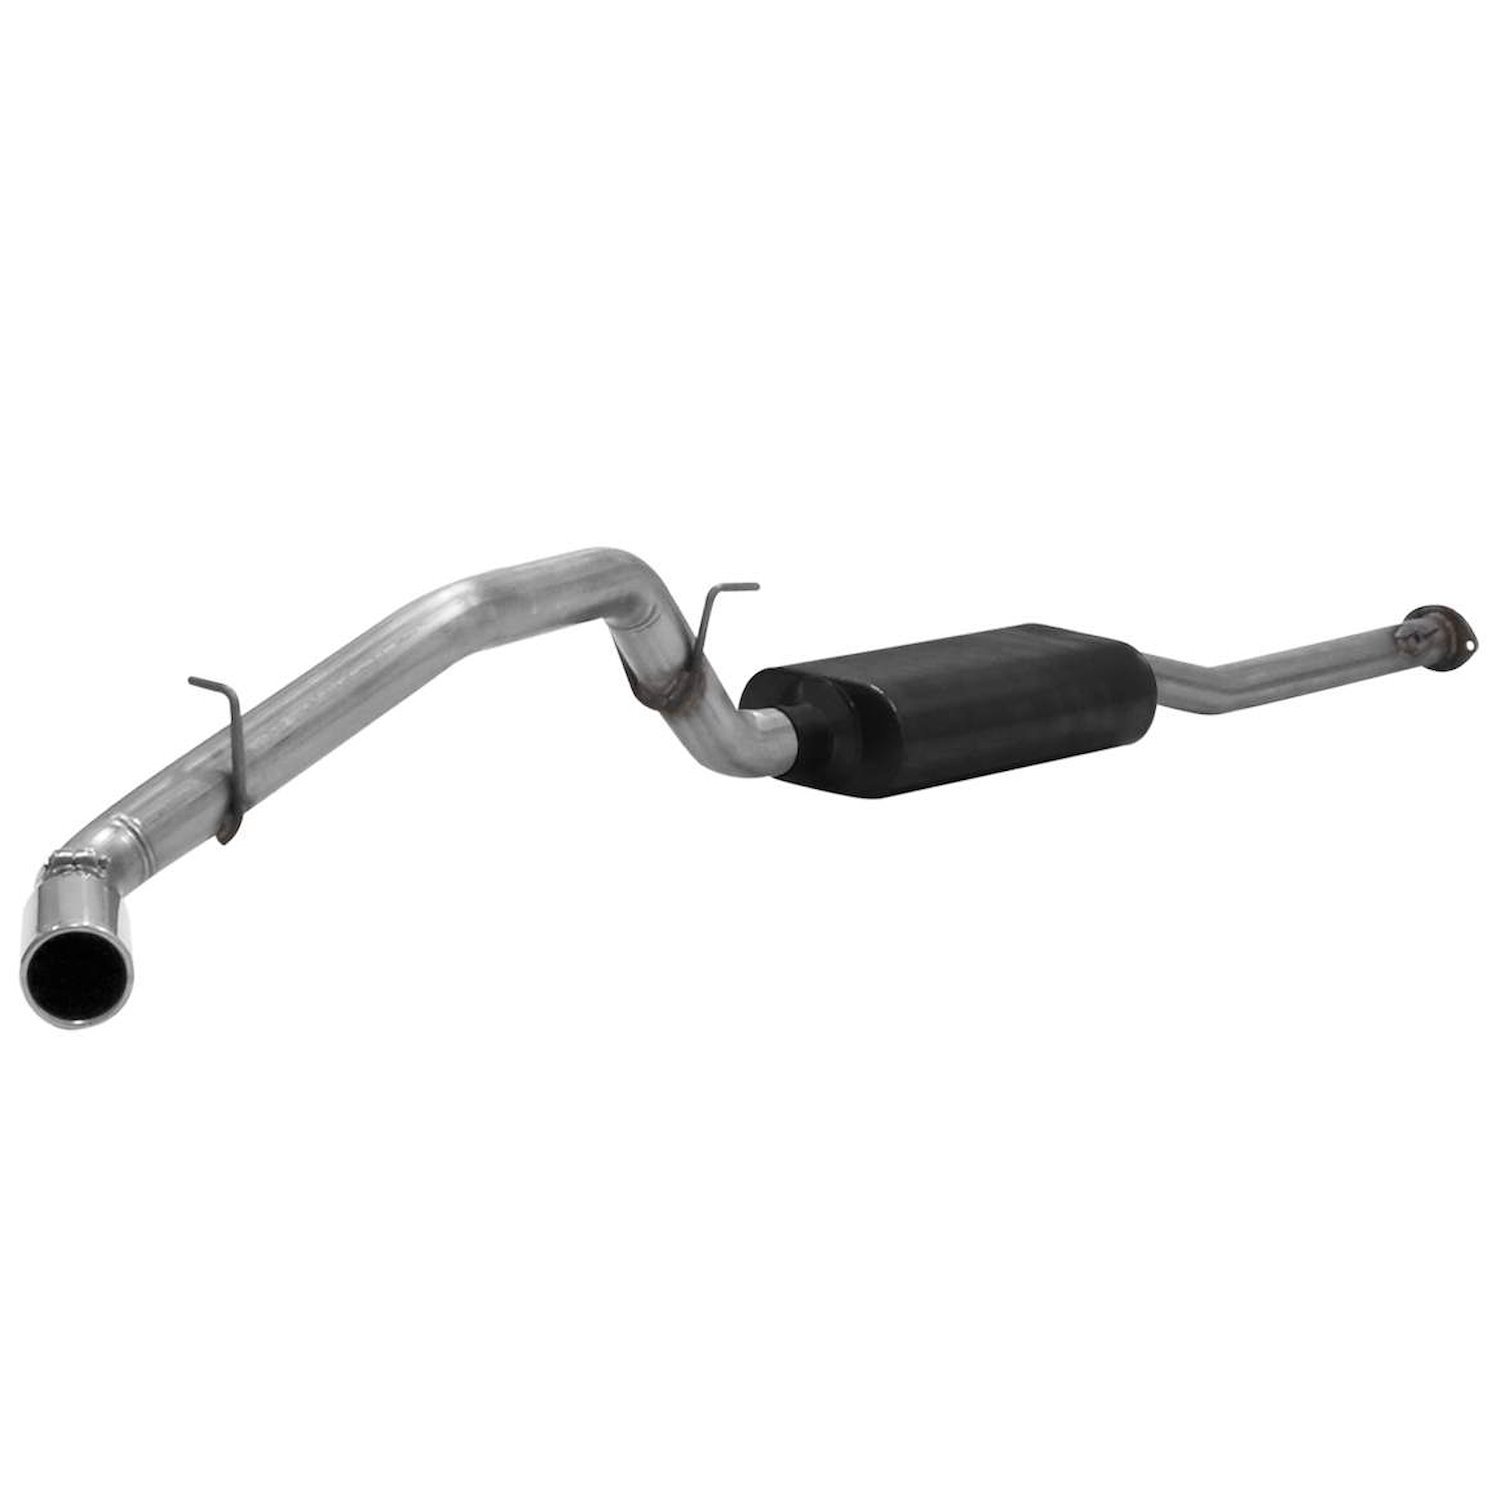 American Thunder Cat-Back Exhaust System 2000-2004 Tacoma 2.7L/3.4L (Ext/Crew Cab)